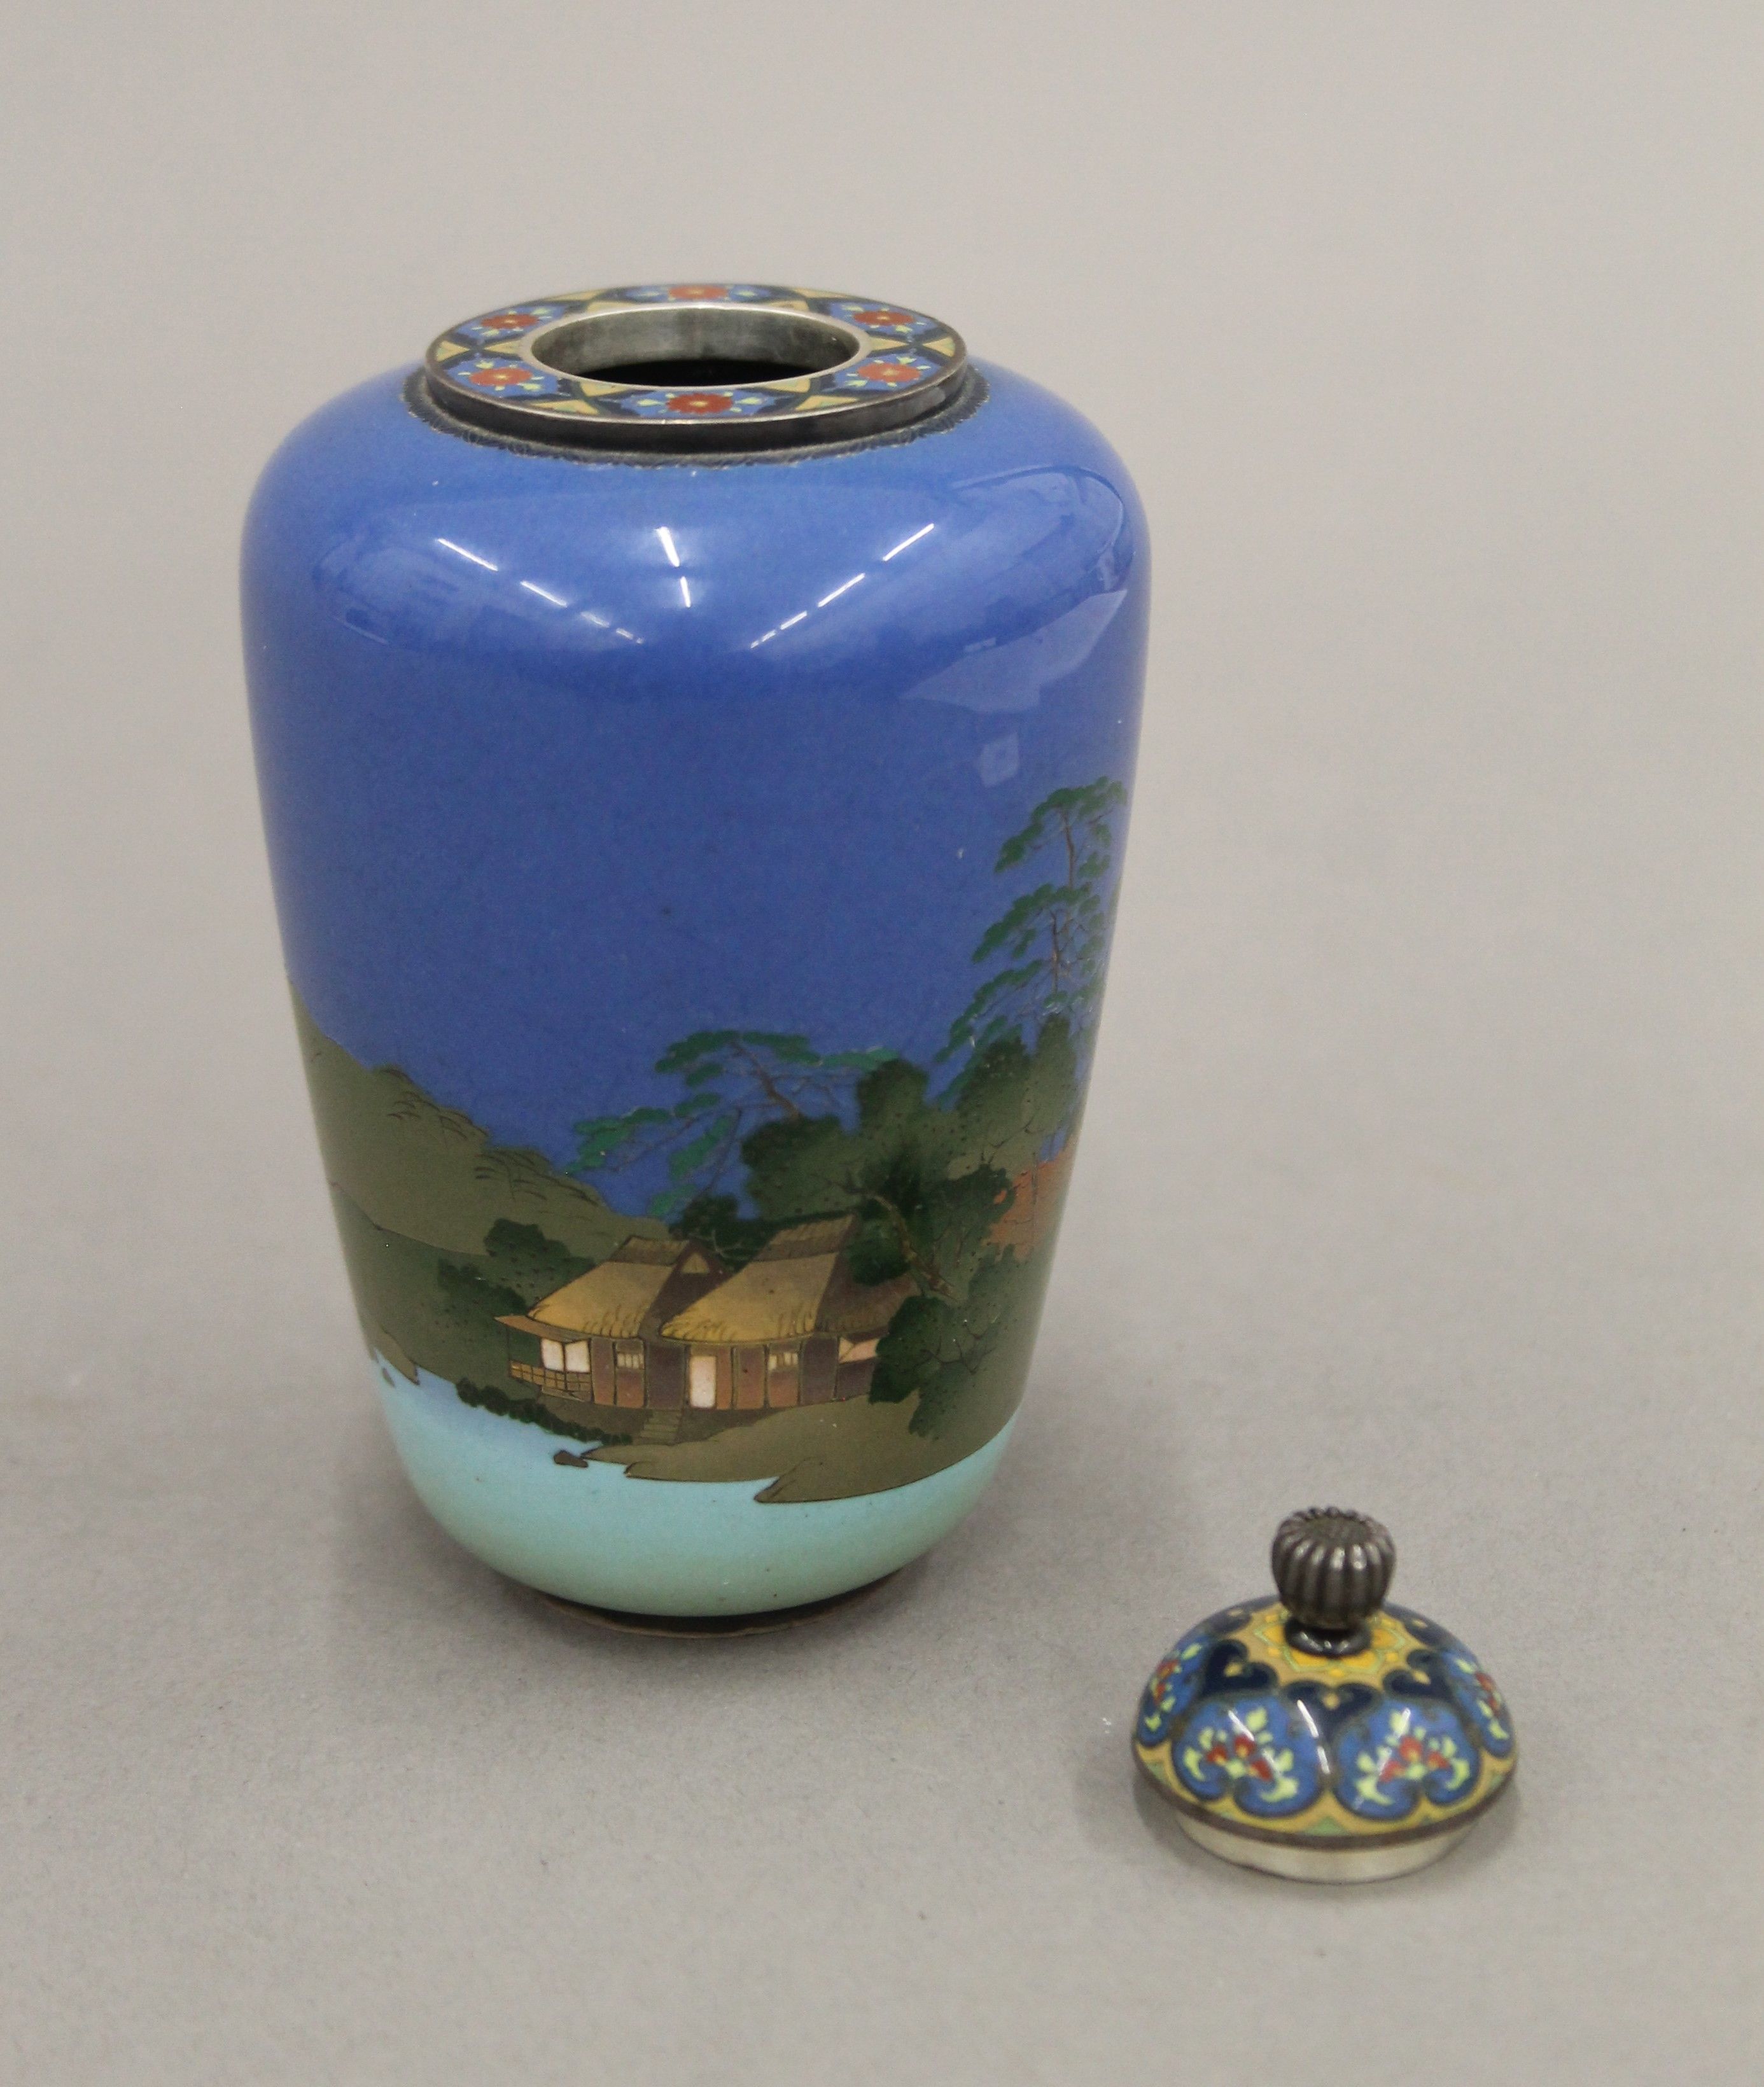 An early 20th century Japanese silver and cloisonne enamel lidded vase decorated with shoreline - Image 4 of 6